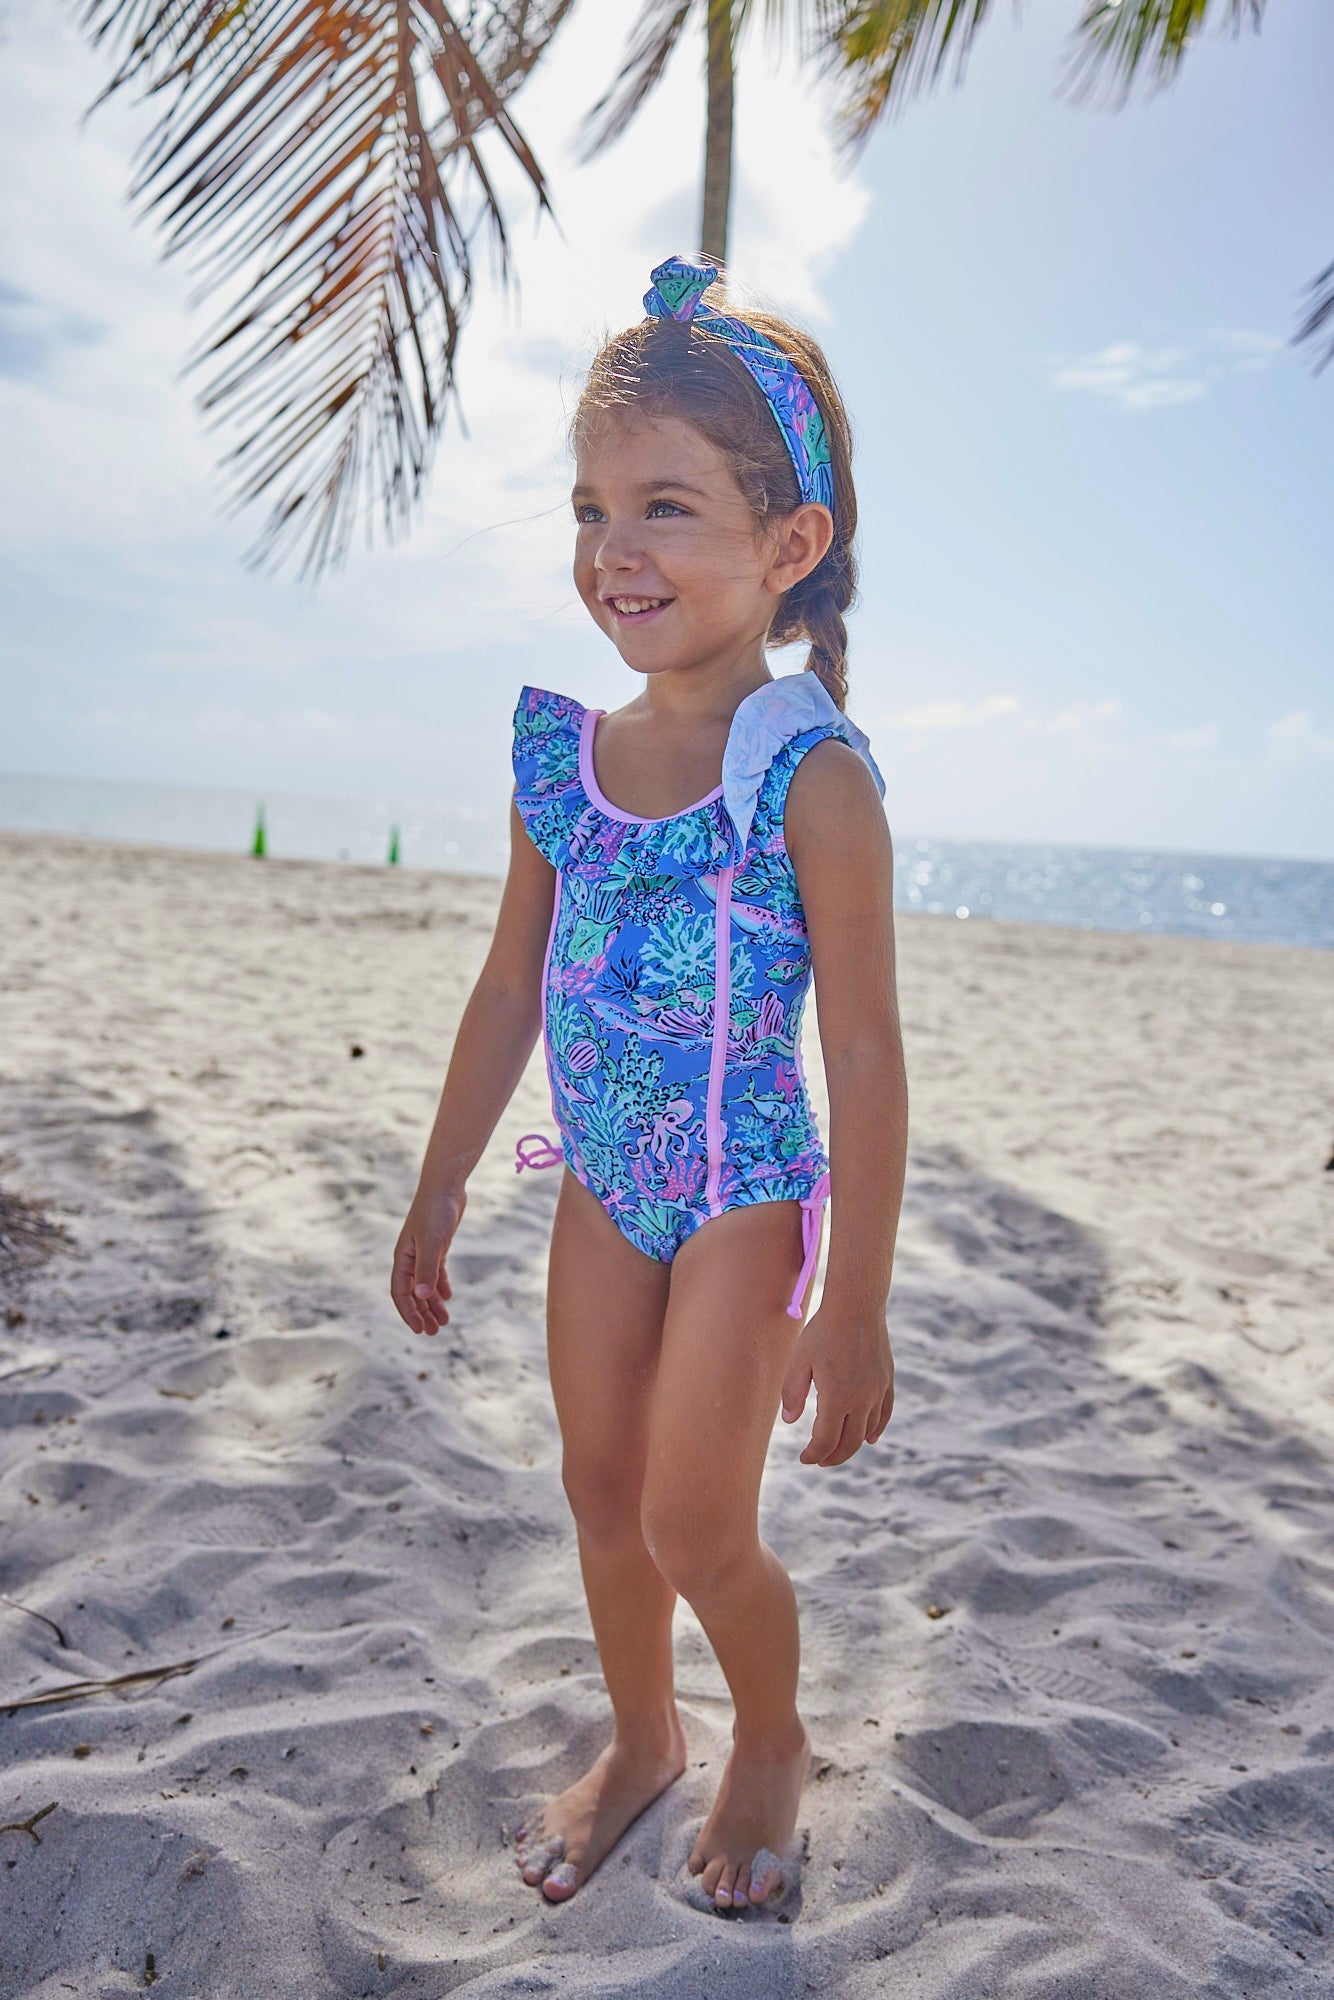 Blueberry Bay-Bahamas Reef One Piece Swimsuit-Whoopsie Daisy